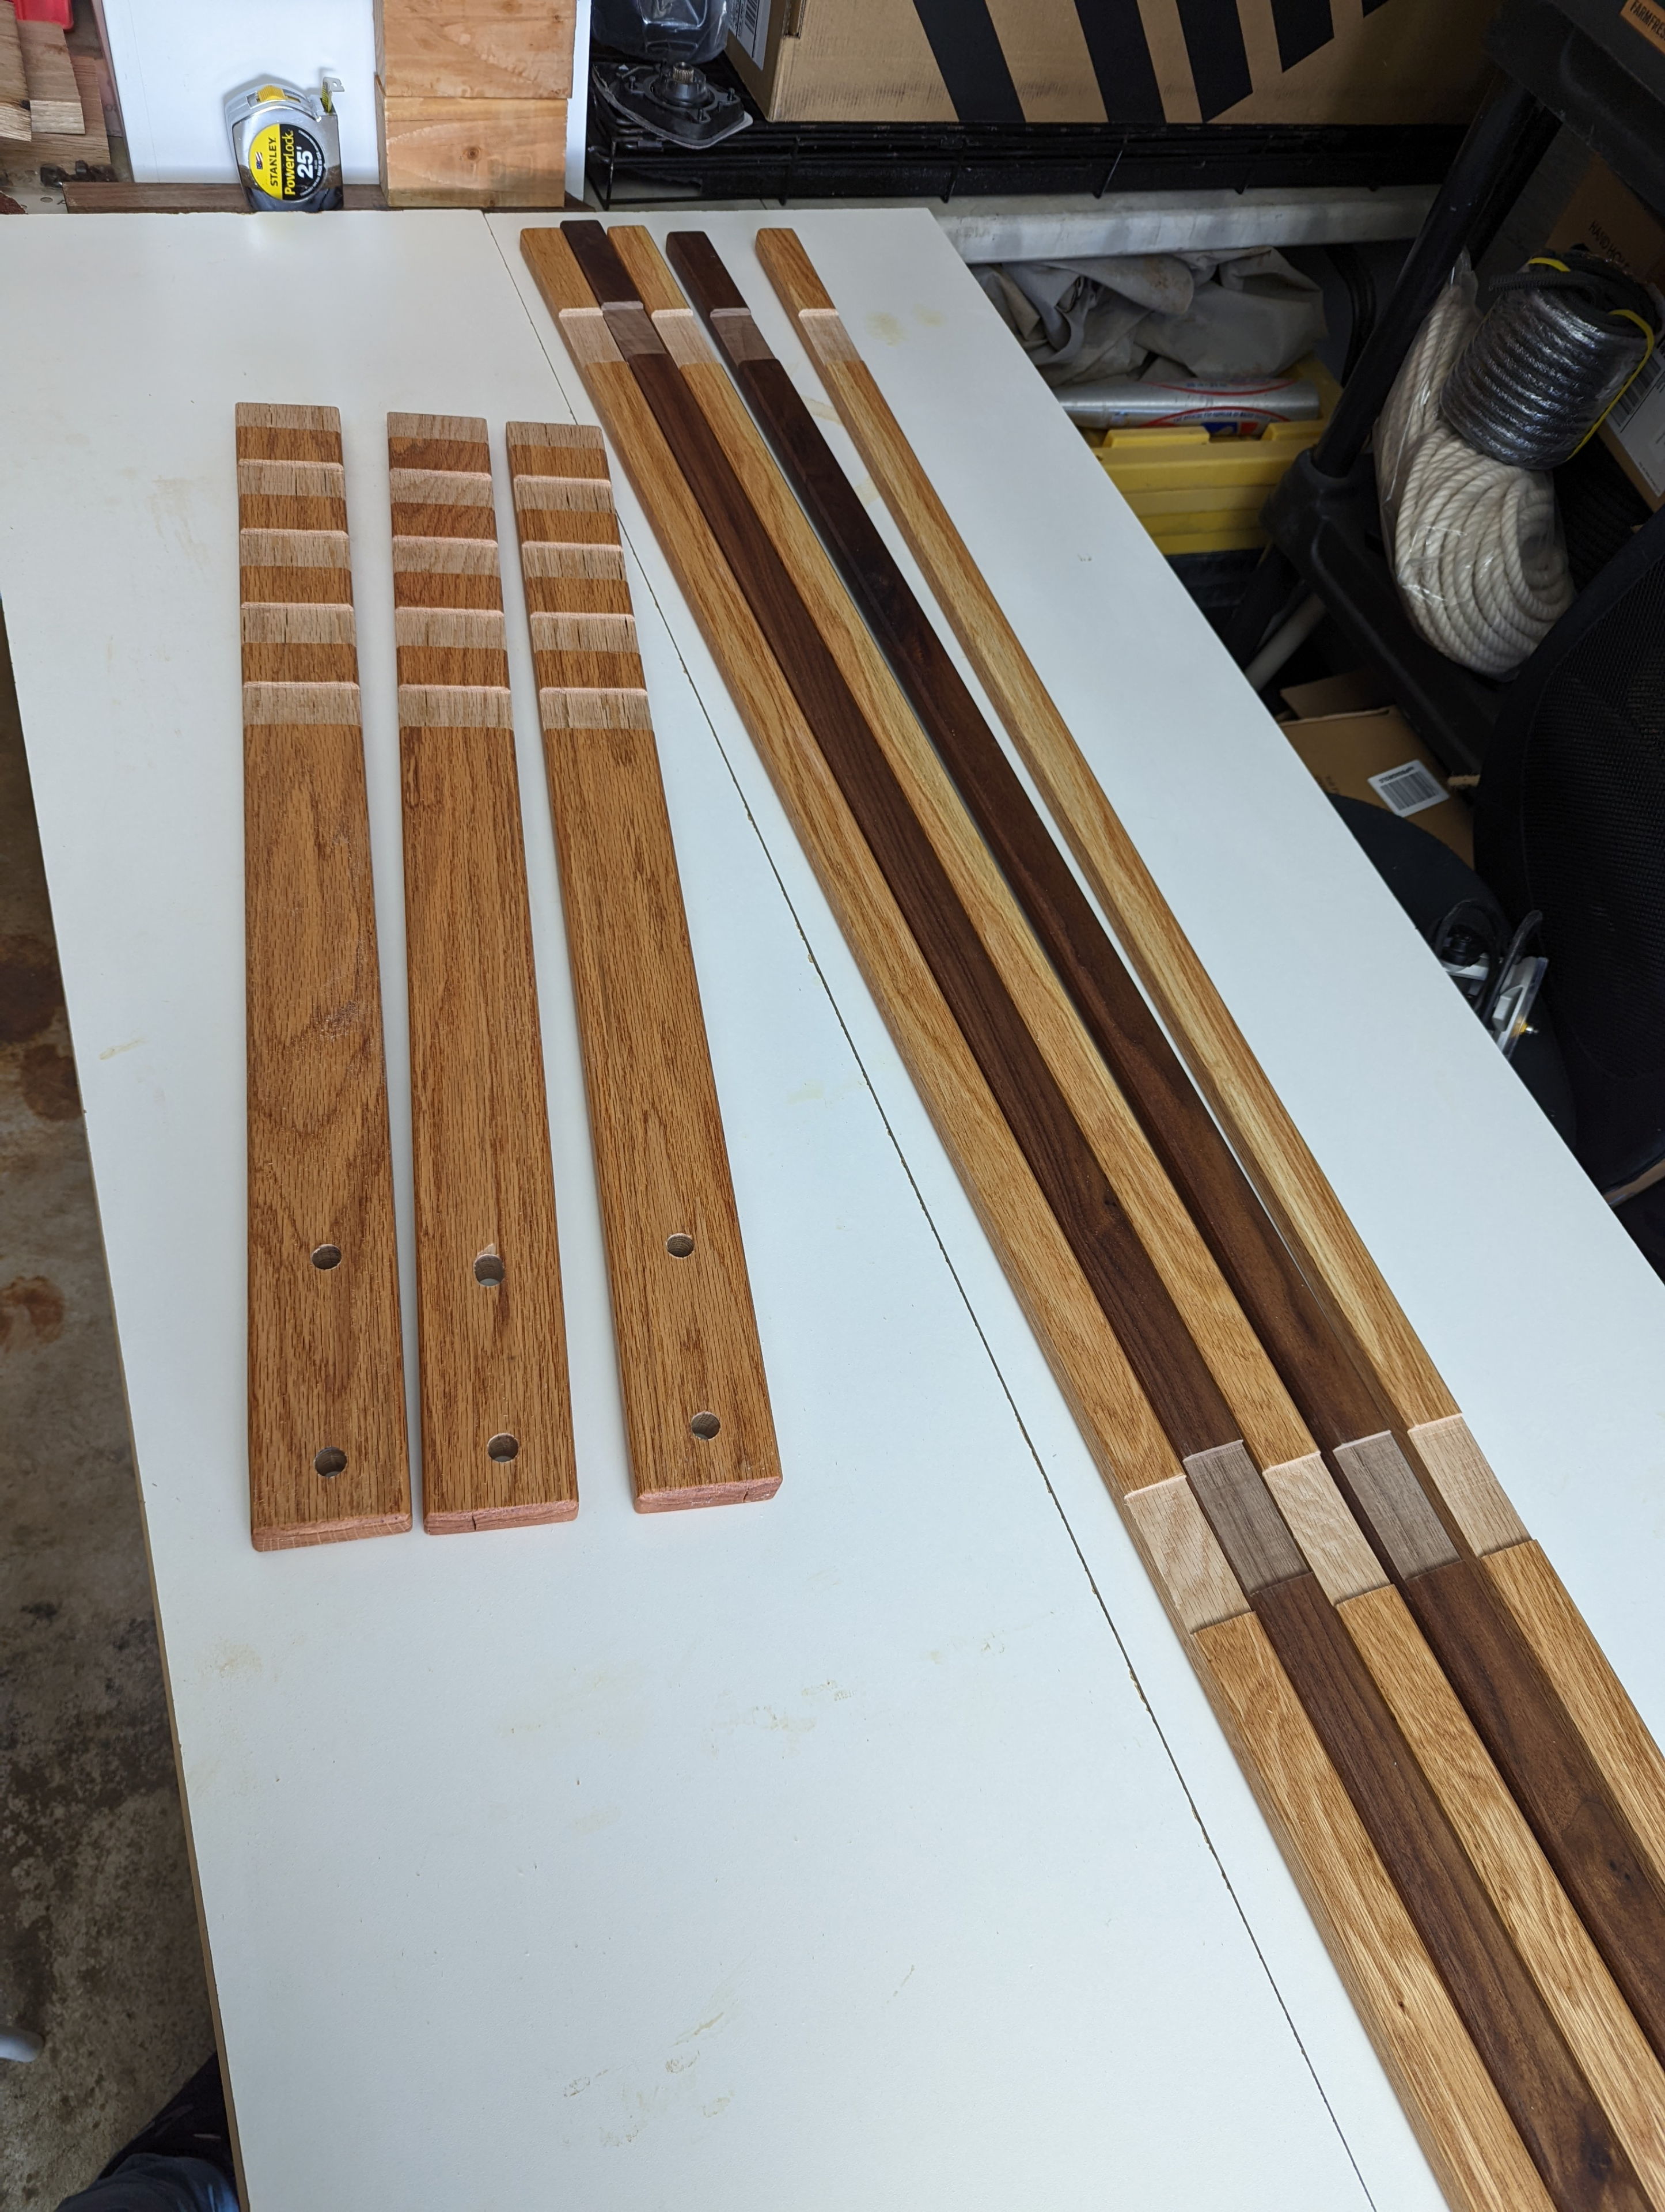 I built the headboard out of a grid of boards with interlocking recesses cut using a cross cut sled and many shallow passes on the table saw, then glued together. This ended up looking much better than my original plan to simply screw them together.